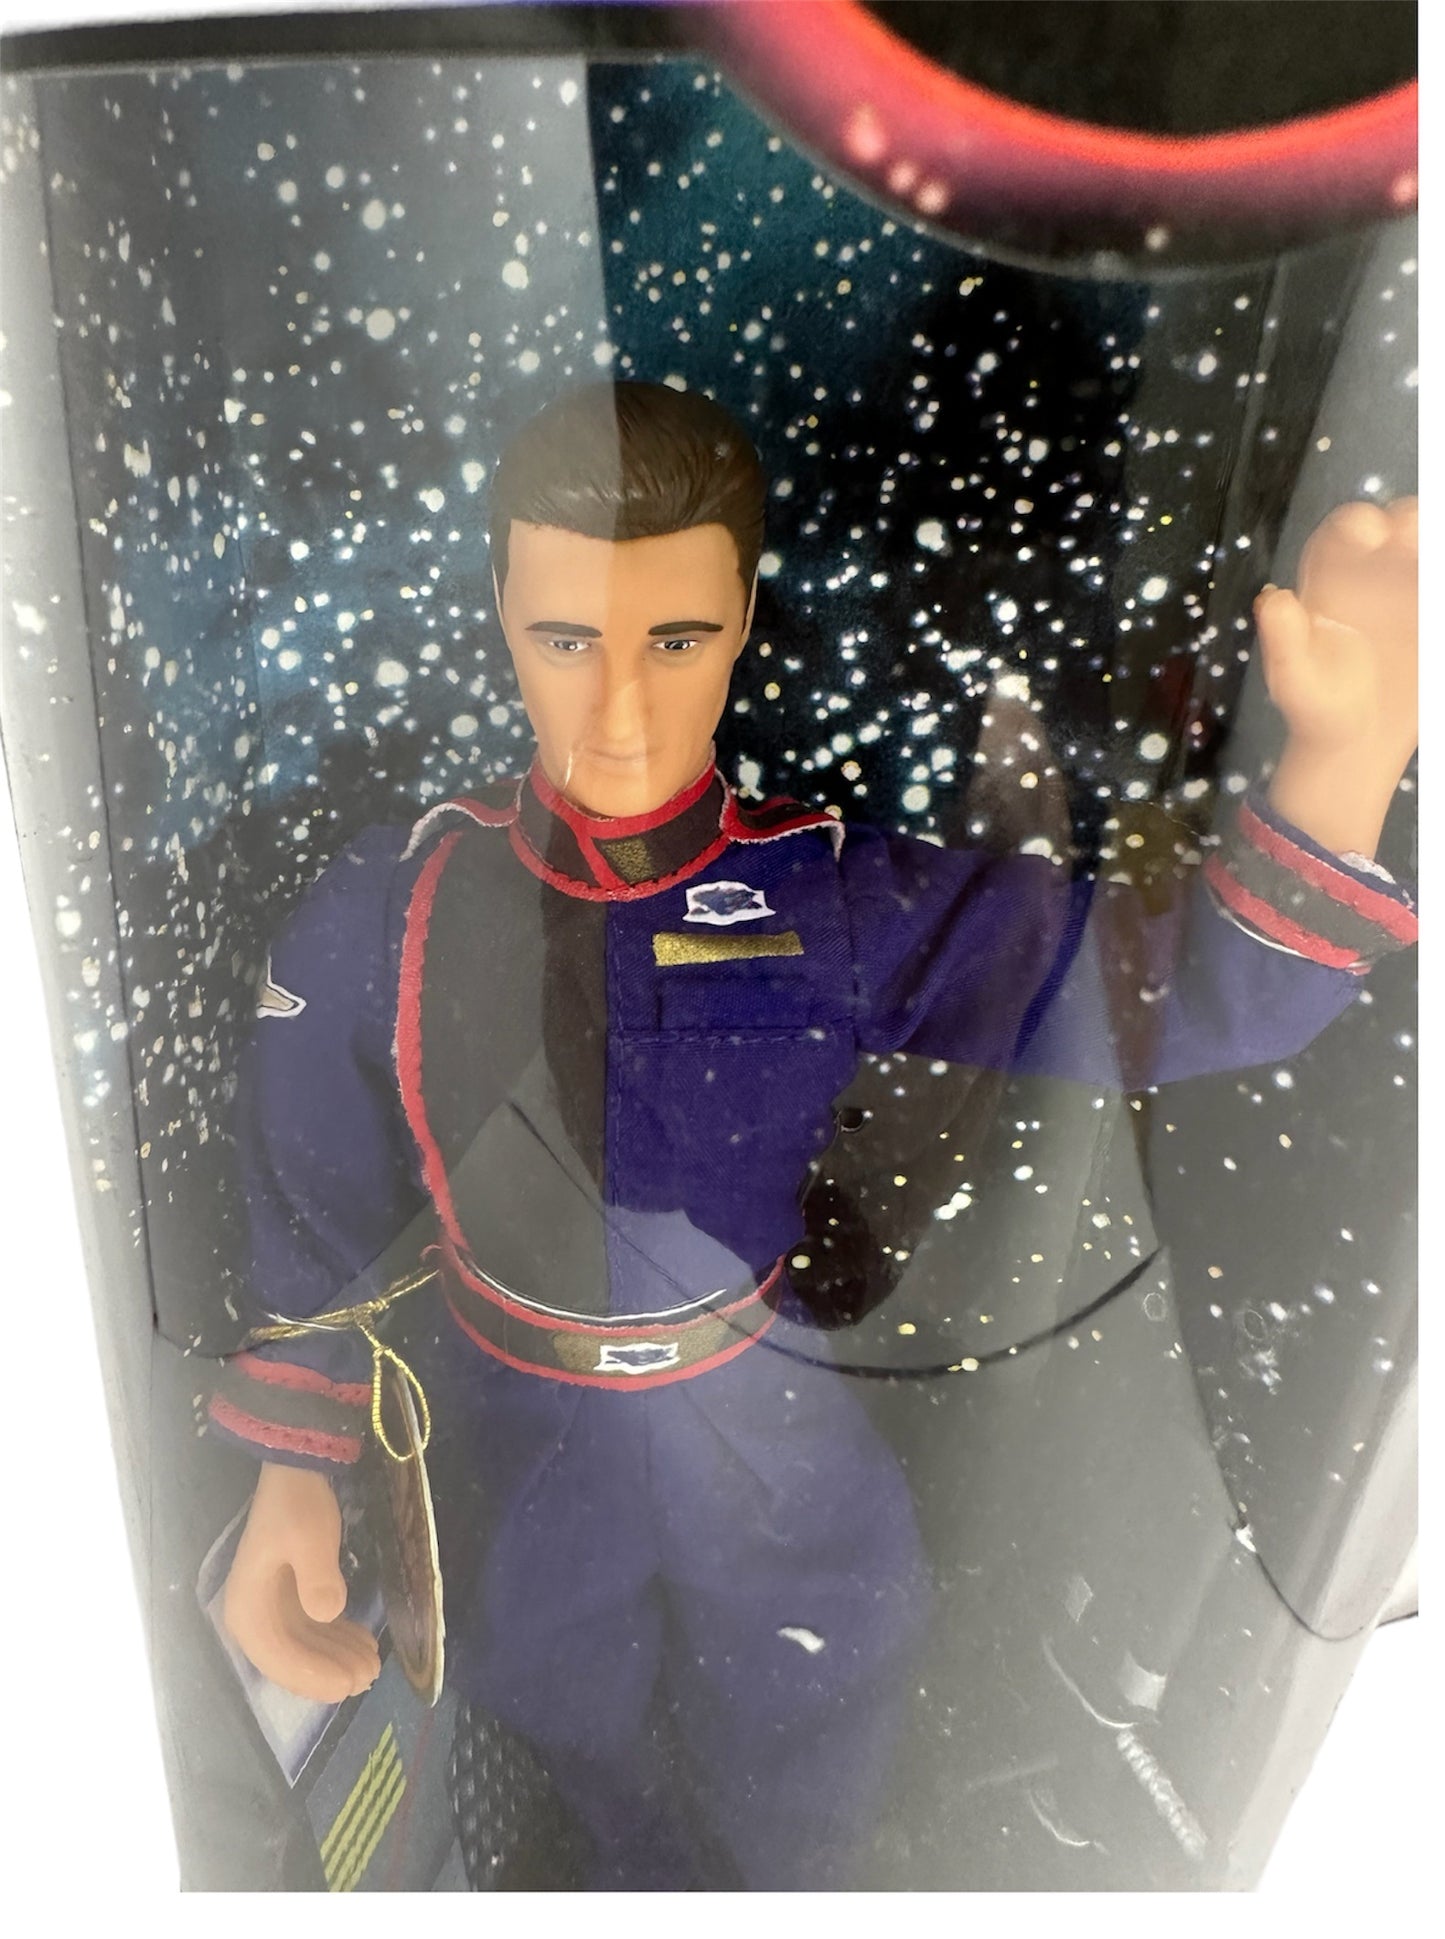 Vintage Exclusive Premieres 1997 Babylon 5 Limited Edition Numbered Series- Captain John Sheridan 9 Inch Action Figure - Brand New Factory Sealed Shop Stock Room Find